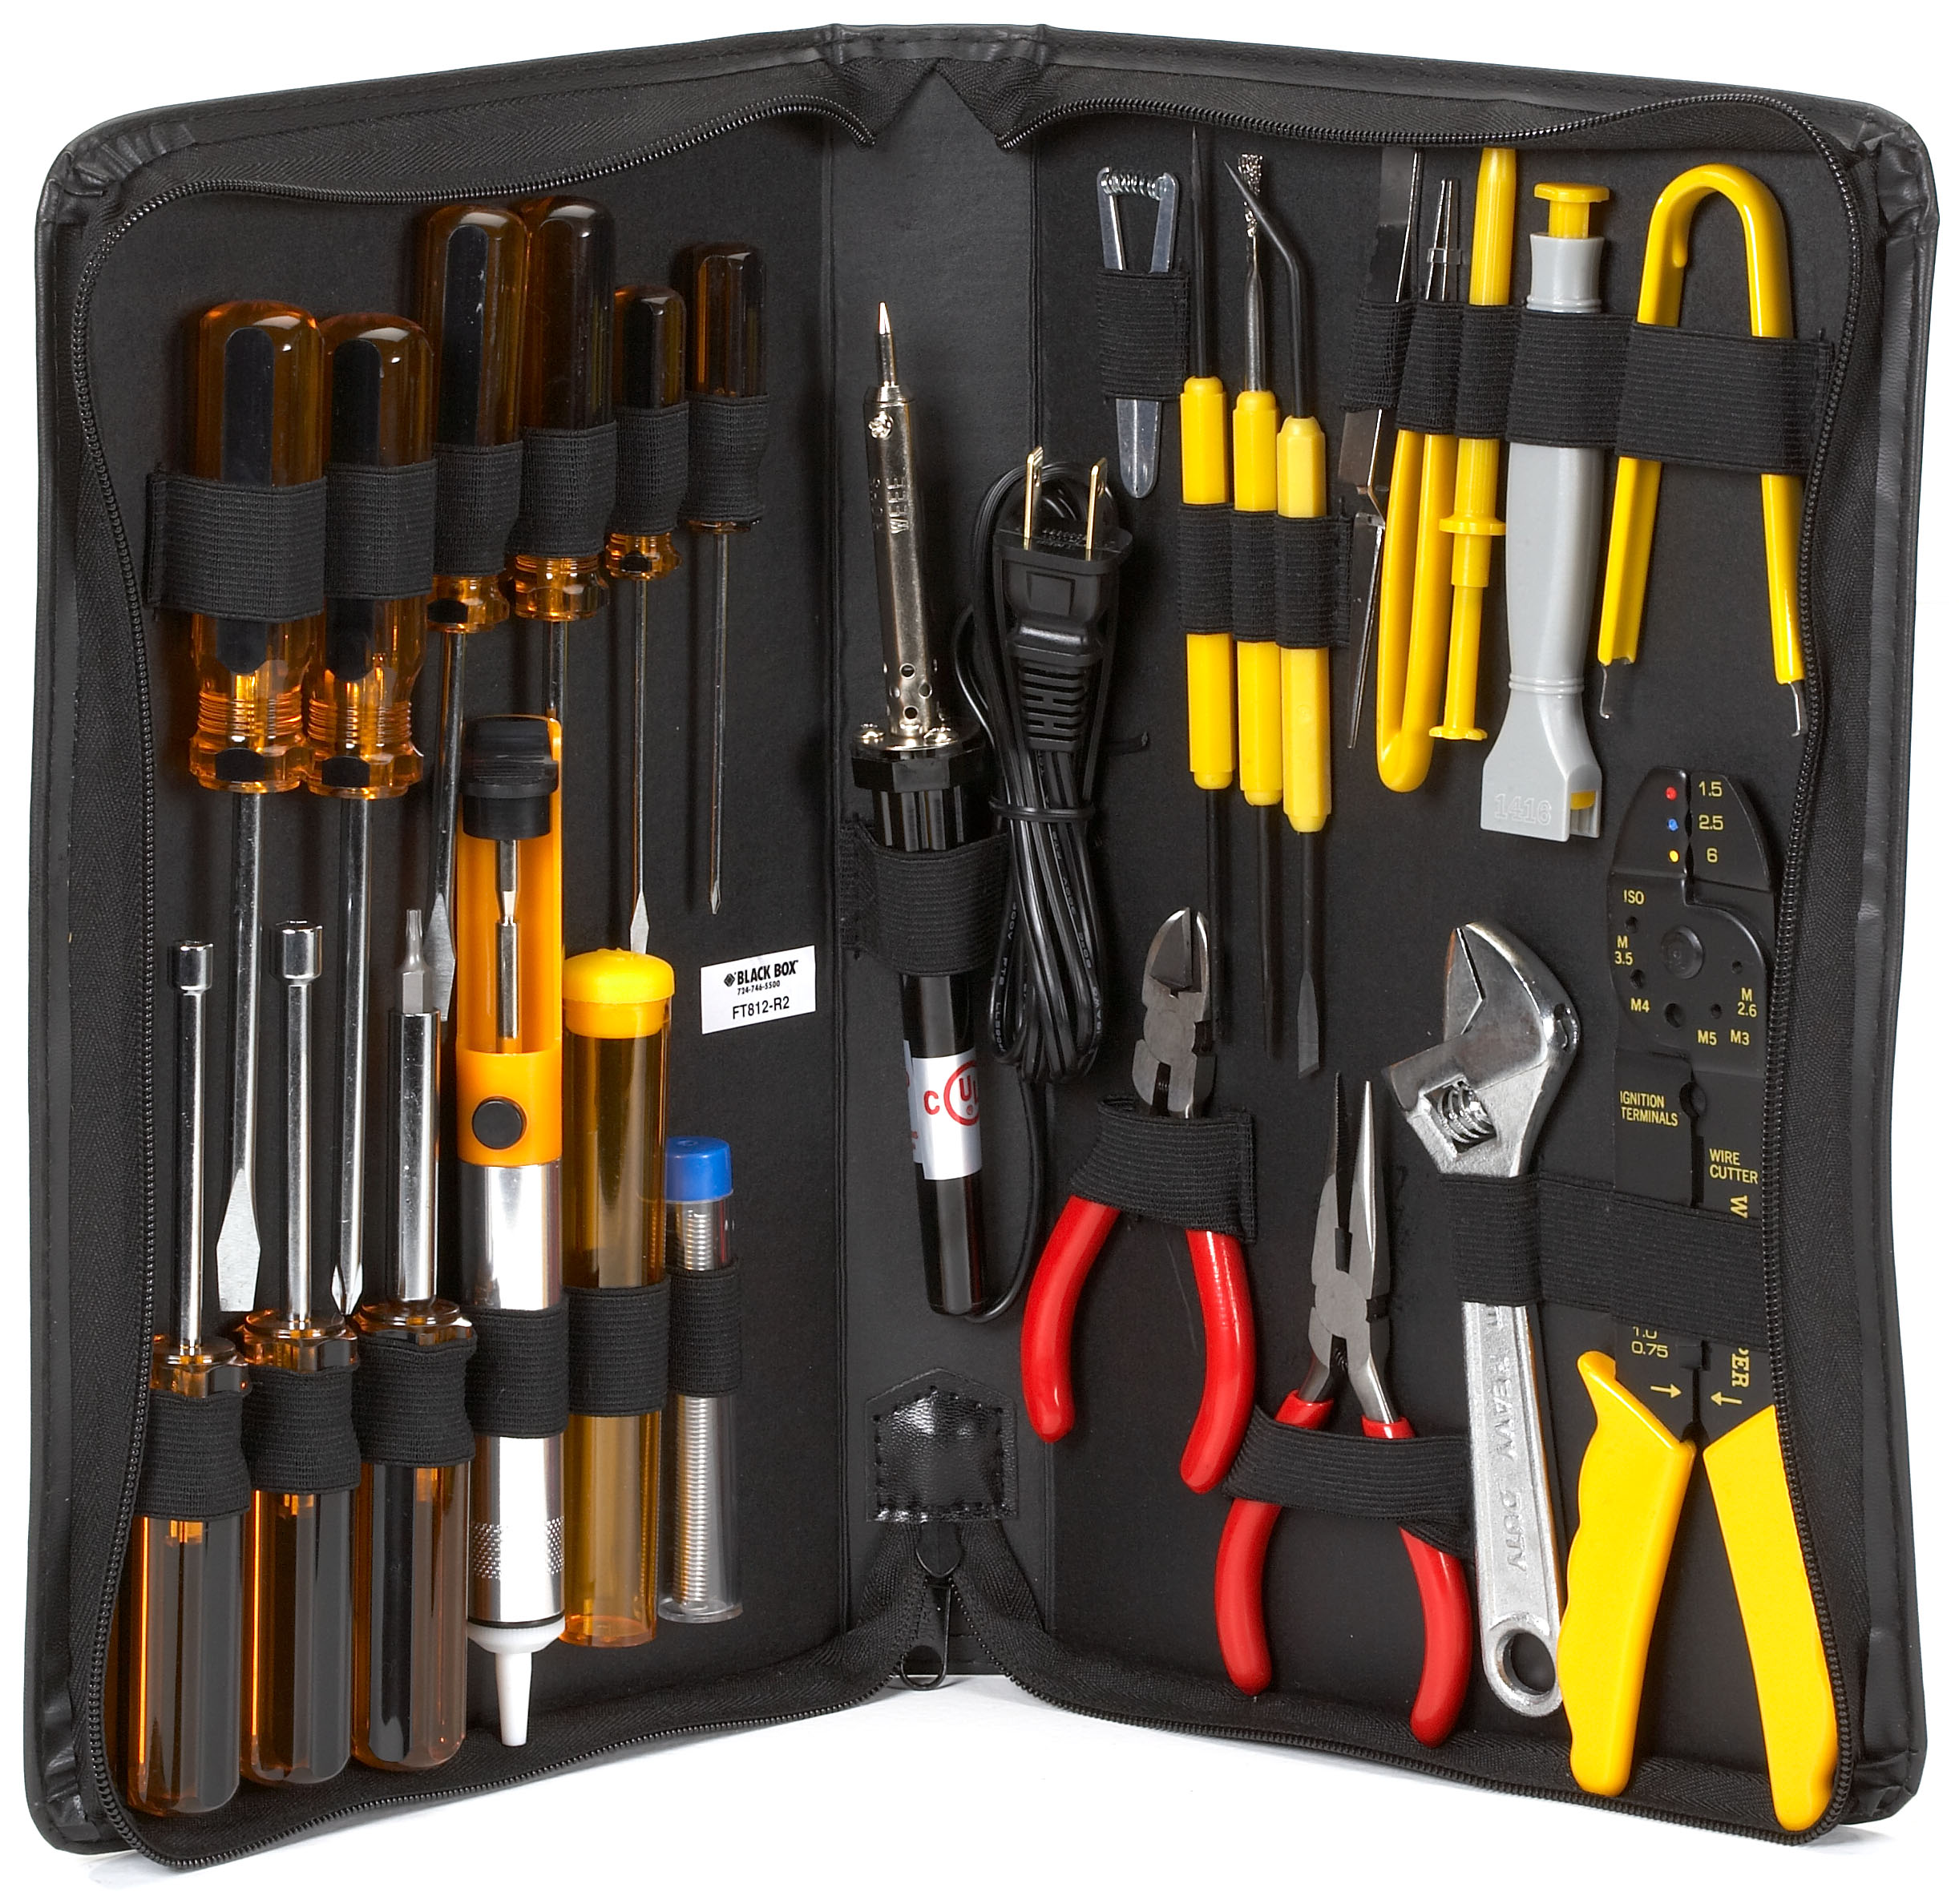 Share more than 160 tool bag with tools included best - 3tdesign.edu.vn